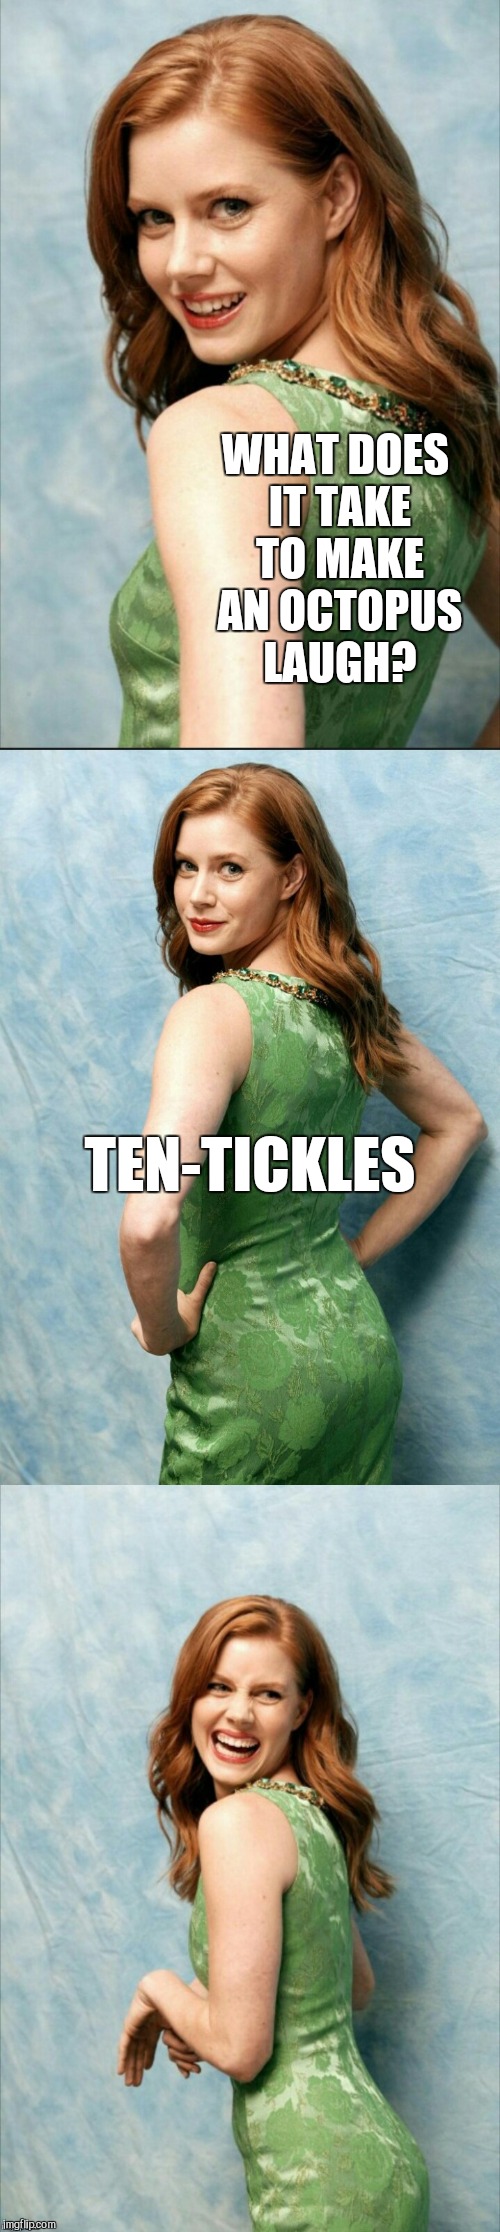 Amy Adams joke template  | WHAT DOES IT TAKE TO MAKE AN OCTOPUS LAUGH? TEN-TICKLES | image tagged in amy adams joke template,jbmemegeek,octopus,bad puns,amy adams | made w/ Imgflip meme maker